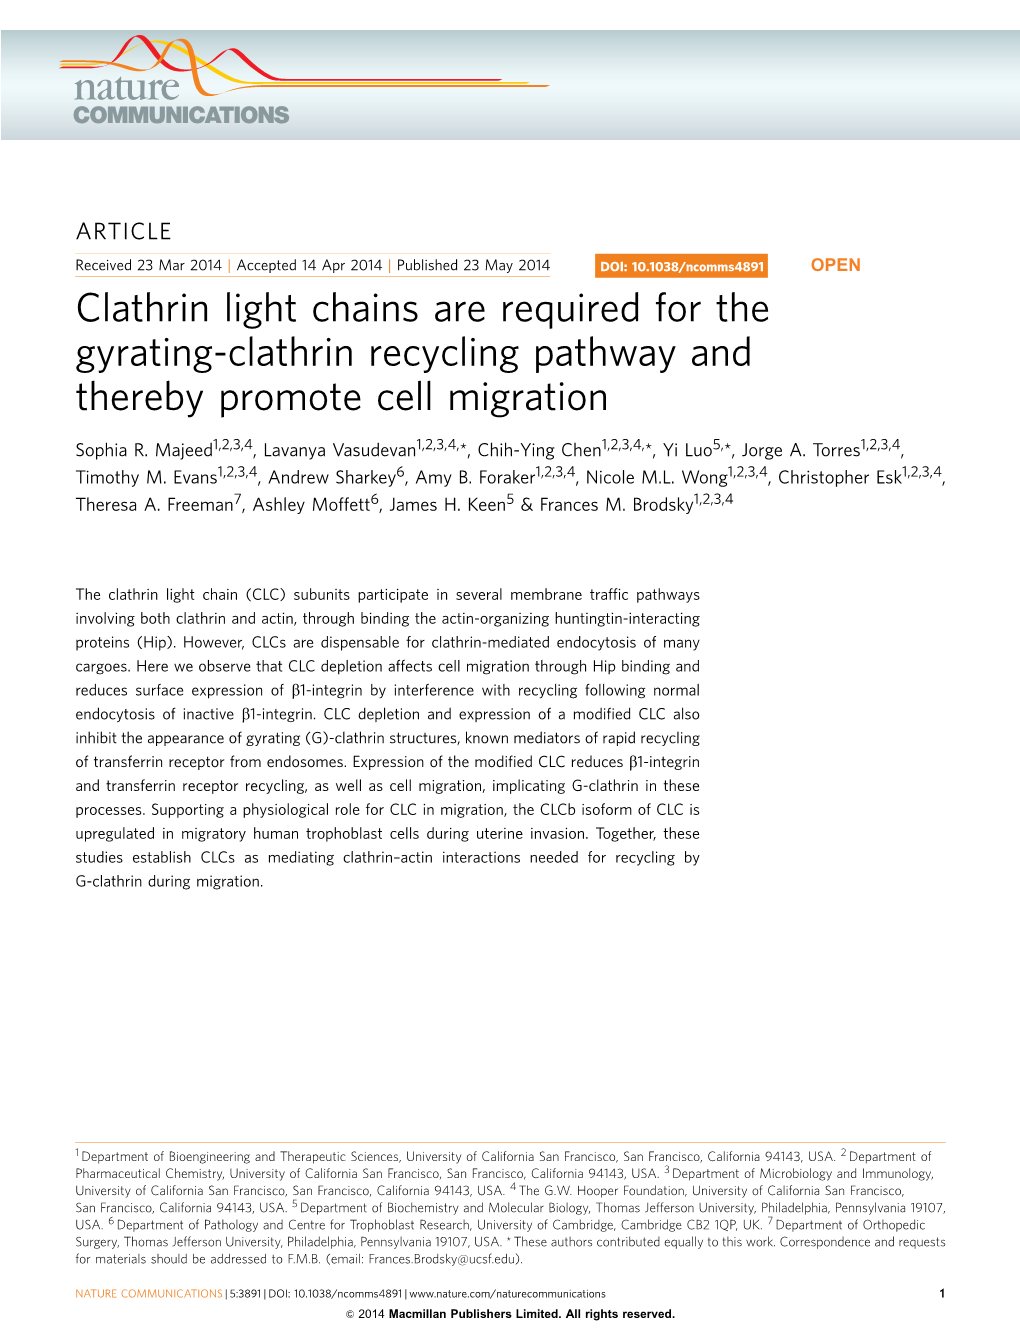 Clathrin Light Chains Are Required for the Gyrating-Clathrin Recycling Pathway and Thereby Promote Cell Migration